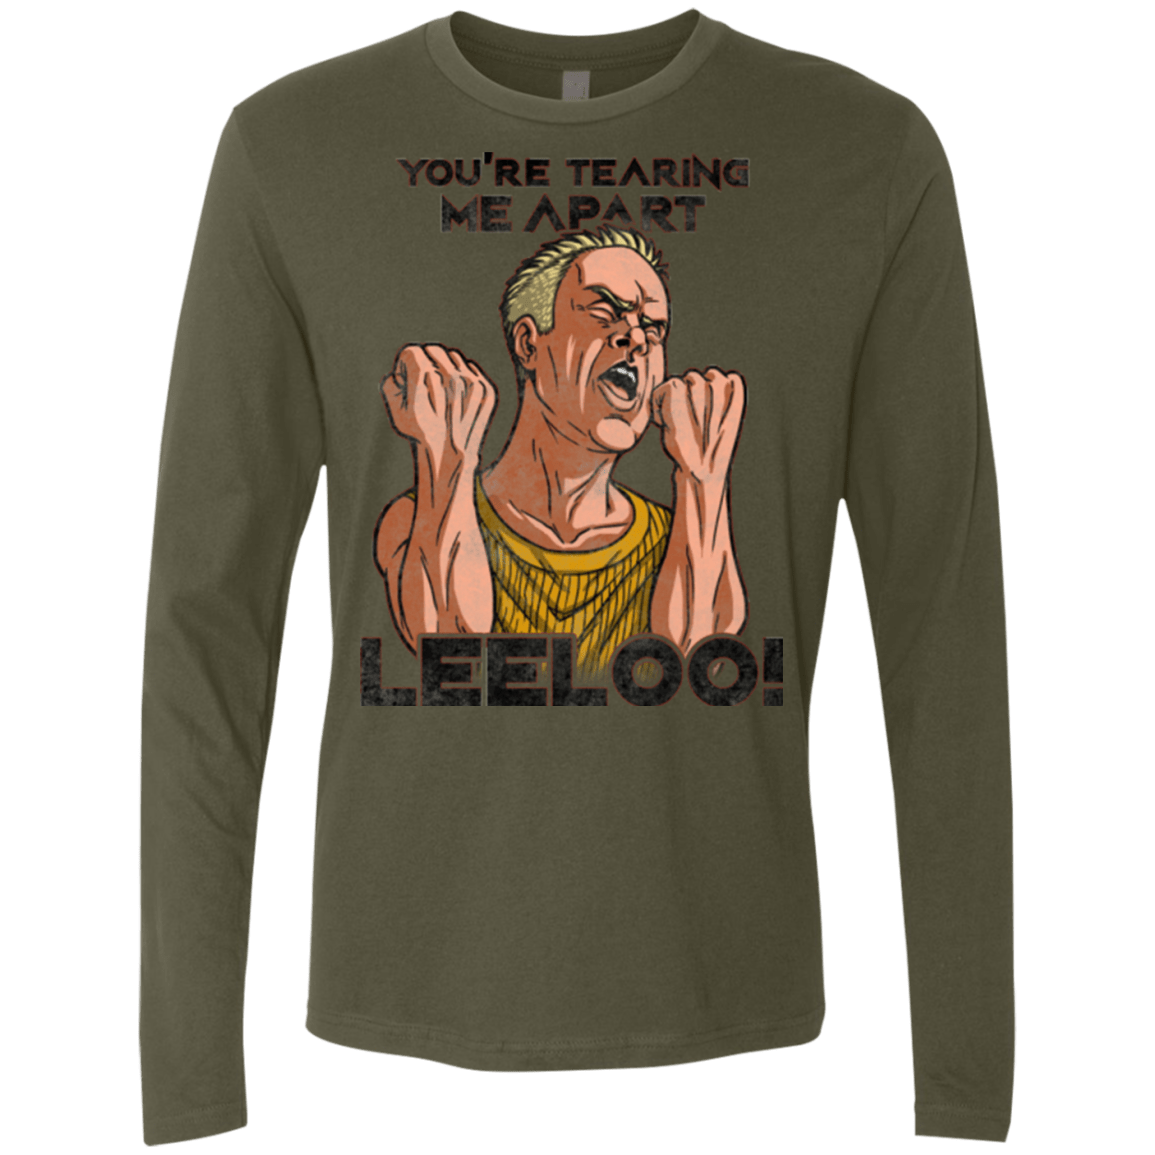 T-Shirts Military Green / Small Youre Tearing Me Apart Leeloo Men's Premium Long Sleeve